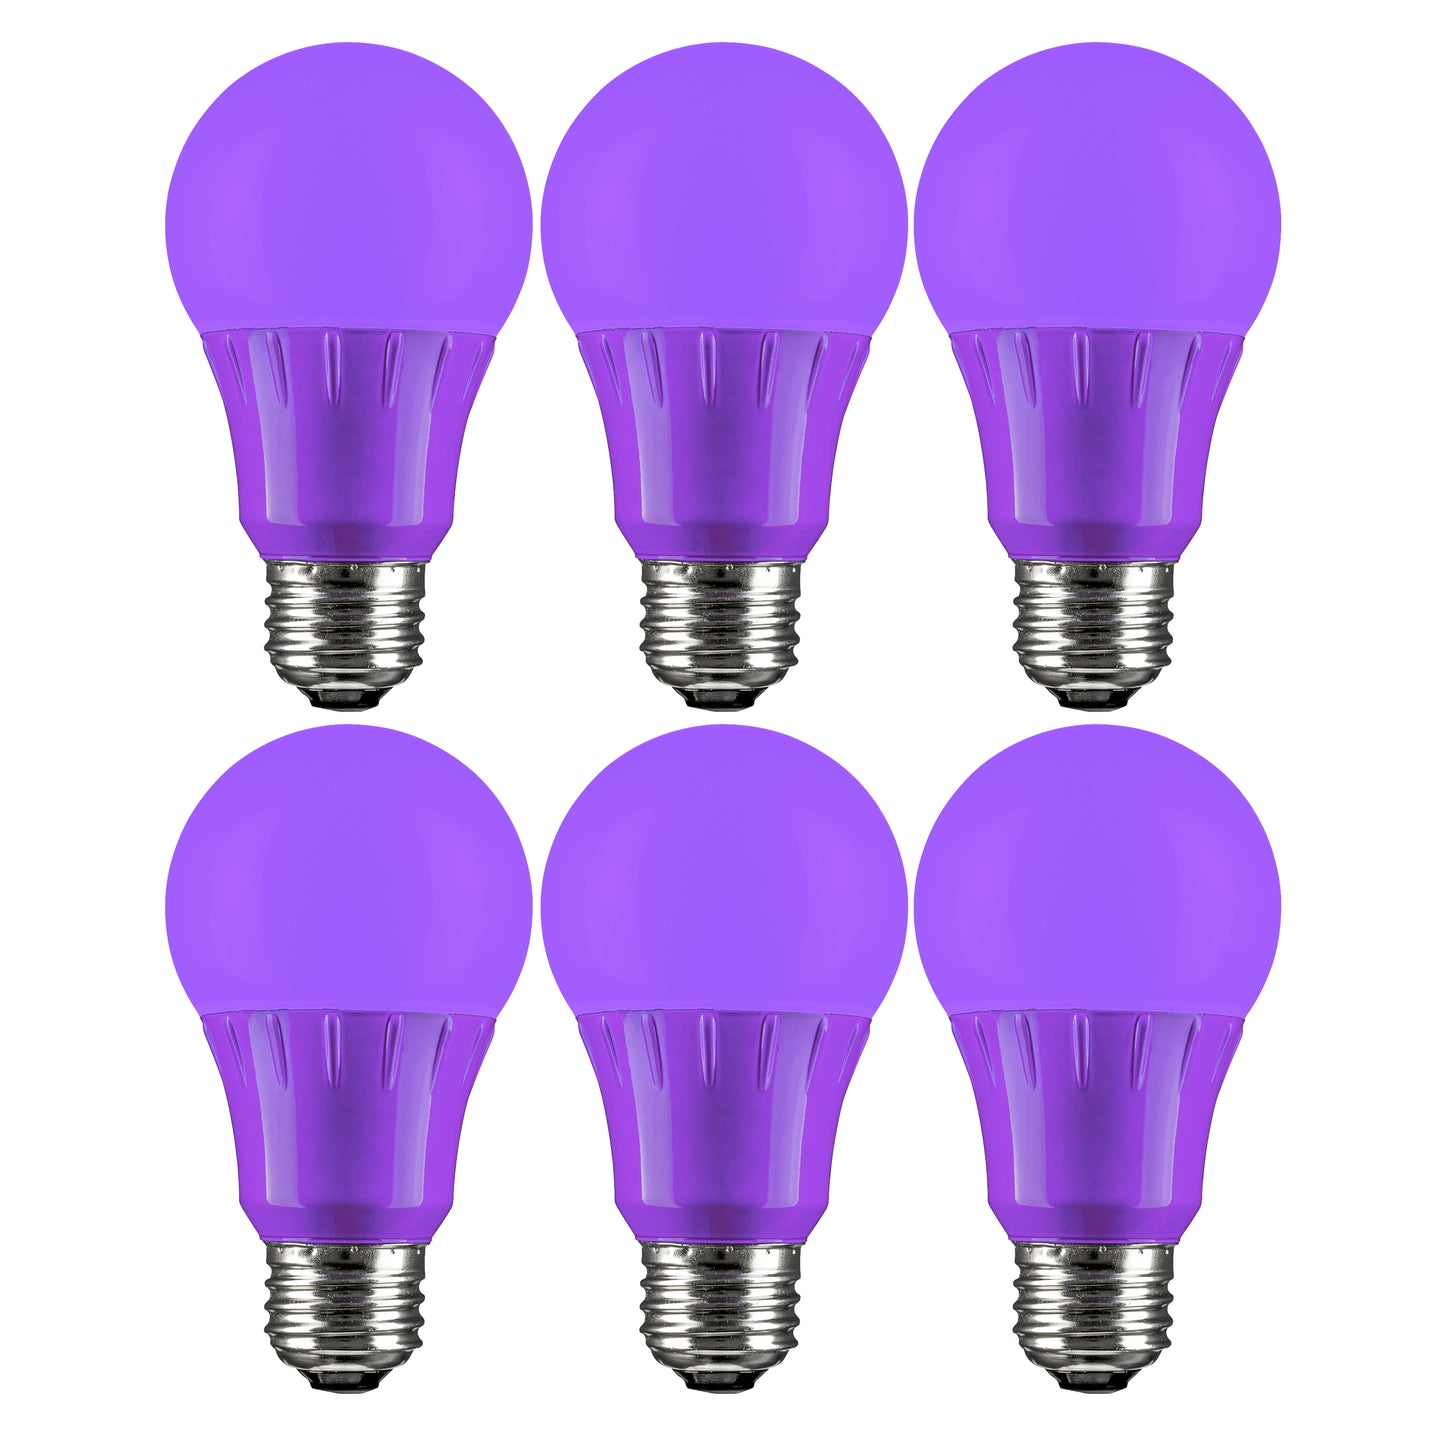 Sunlite 40946 LED A19 Colored Light Bulb, 3 Watts (25w Equivalent), E26 Medium Base, Non-Dimmable, UL Listed, Party Decoration, Holiday Lighting, Purple, 6 Pack